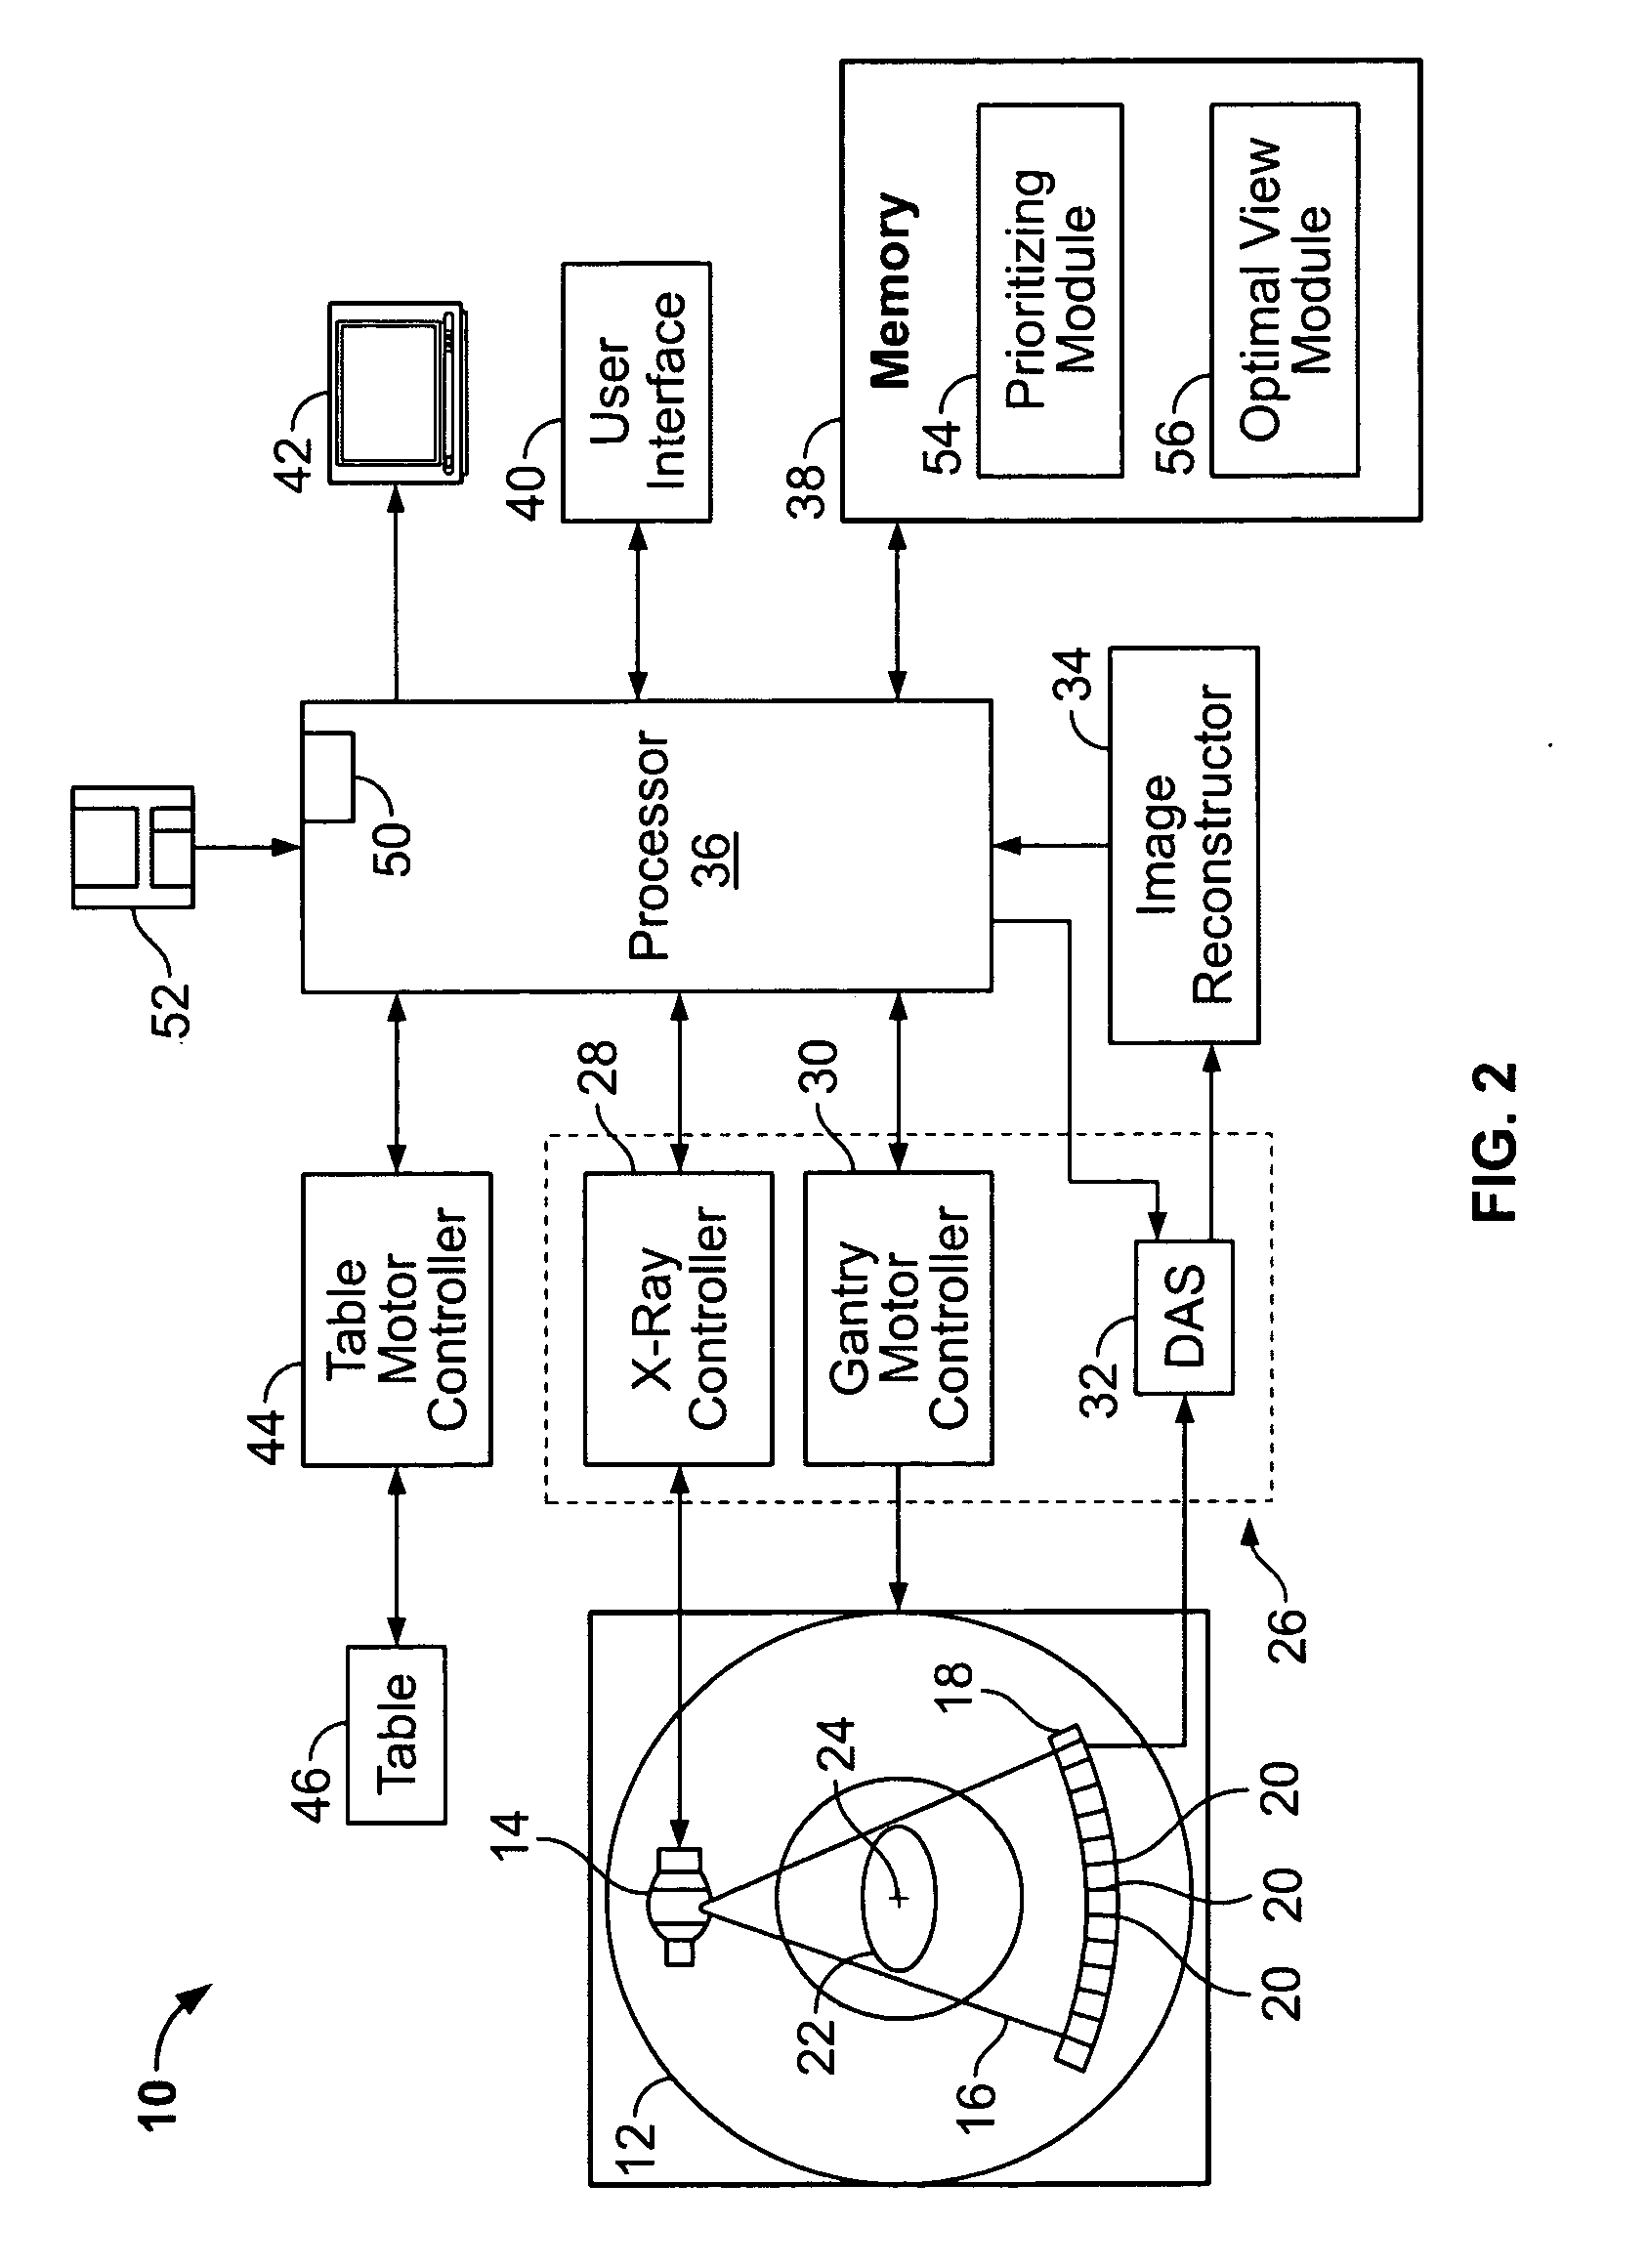 Method and system for automatically identifying and displaying vessel plaque views